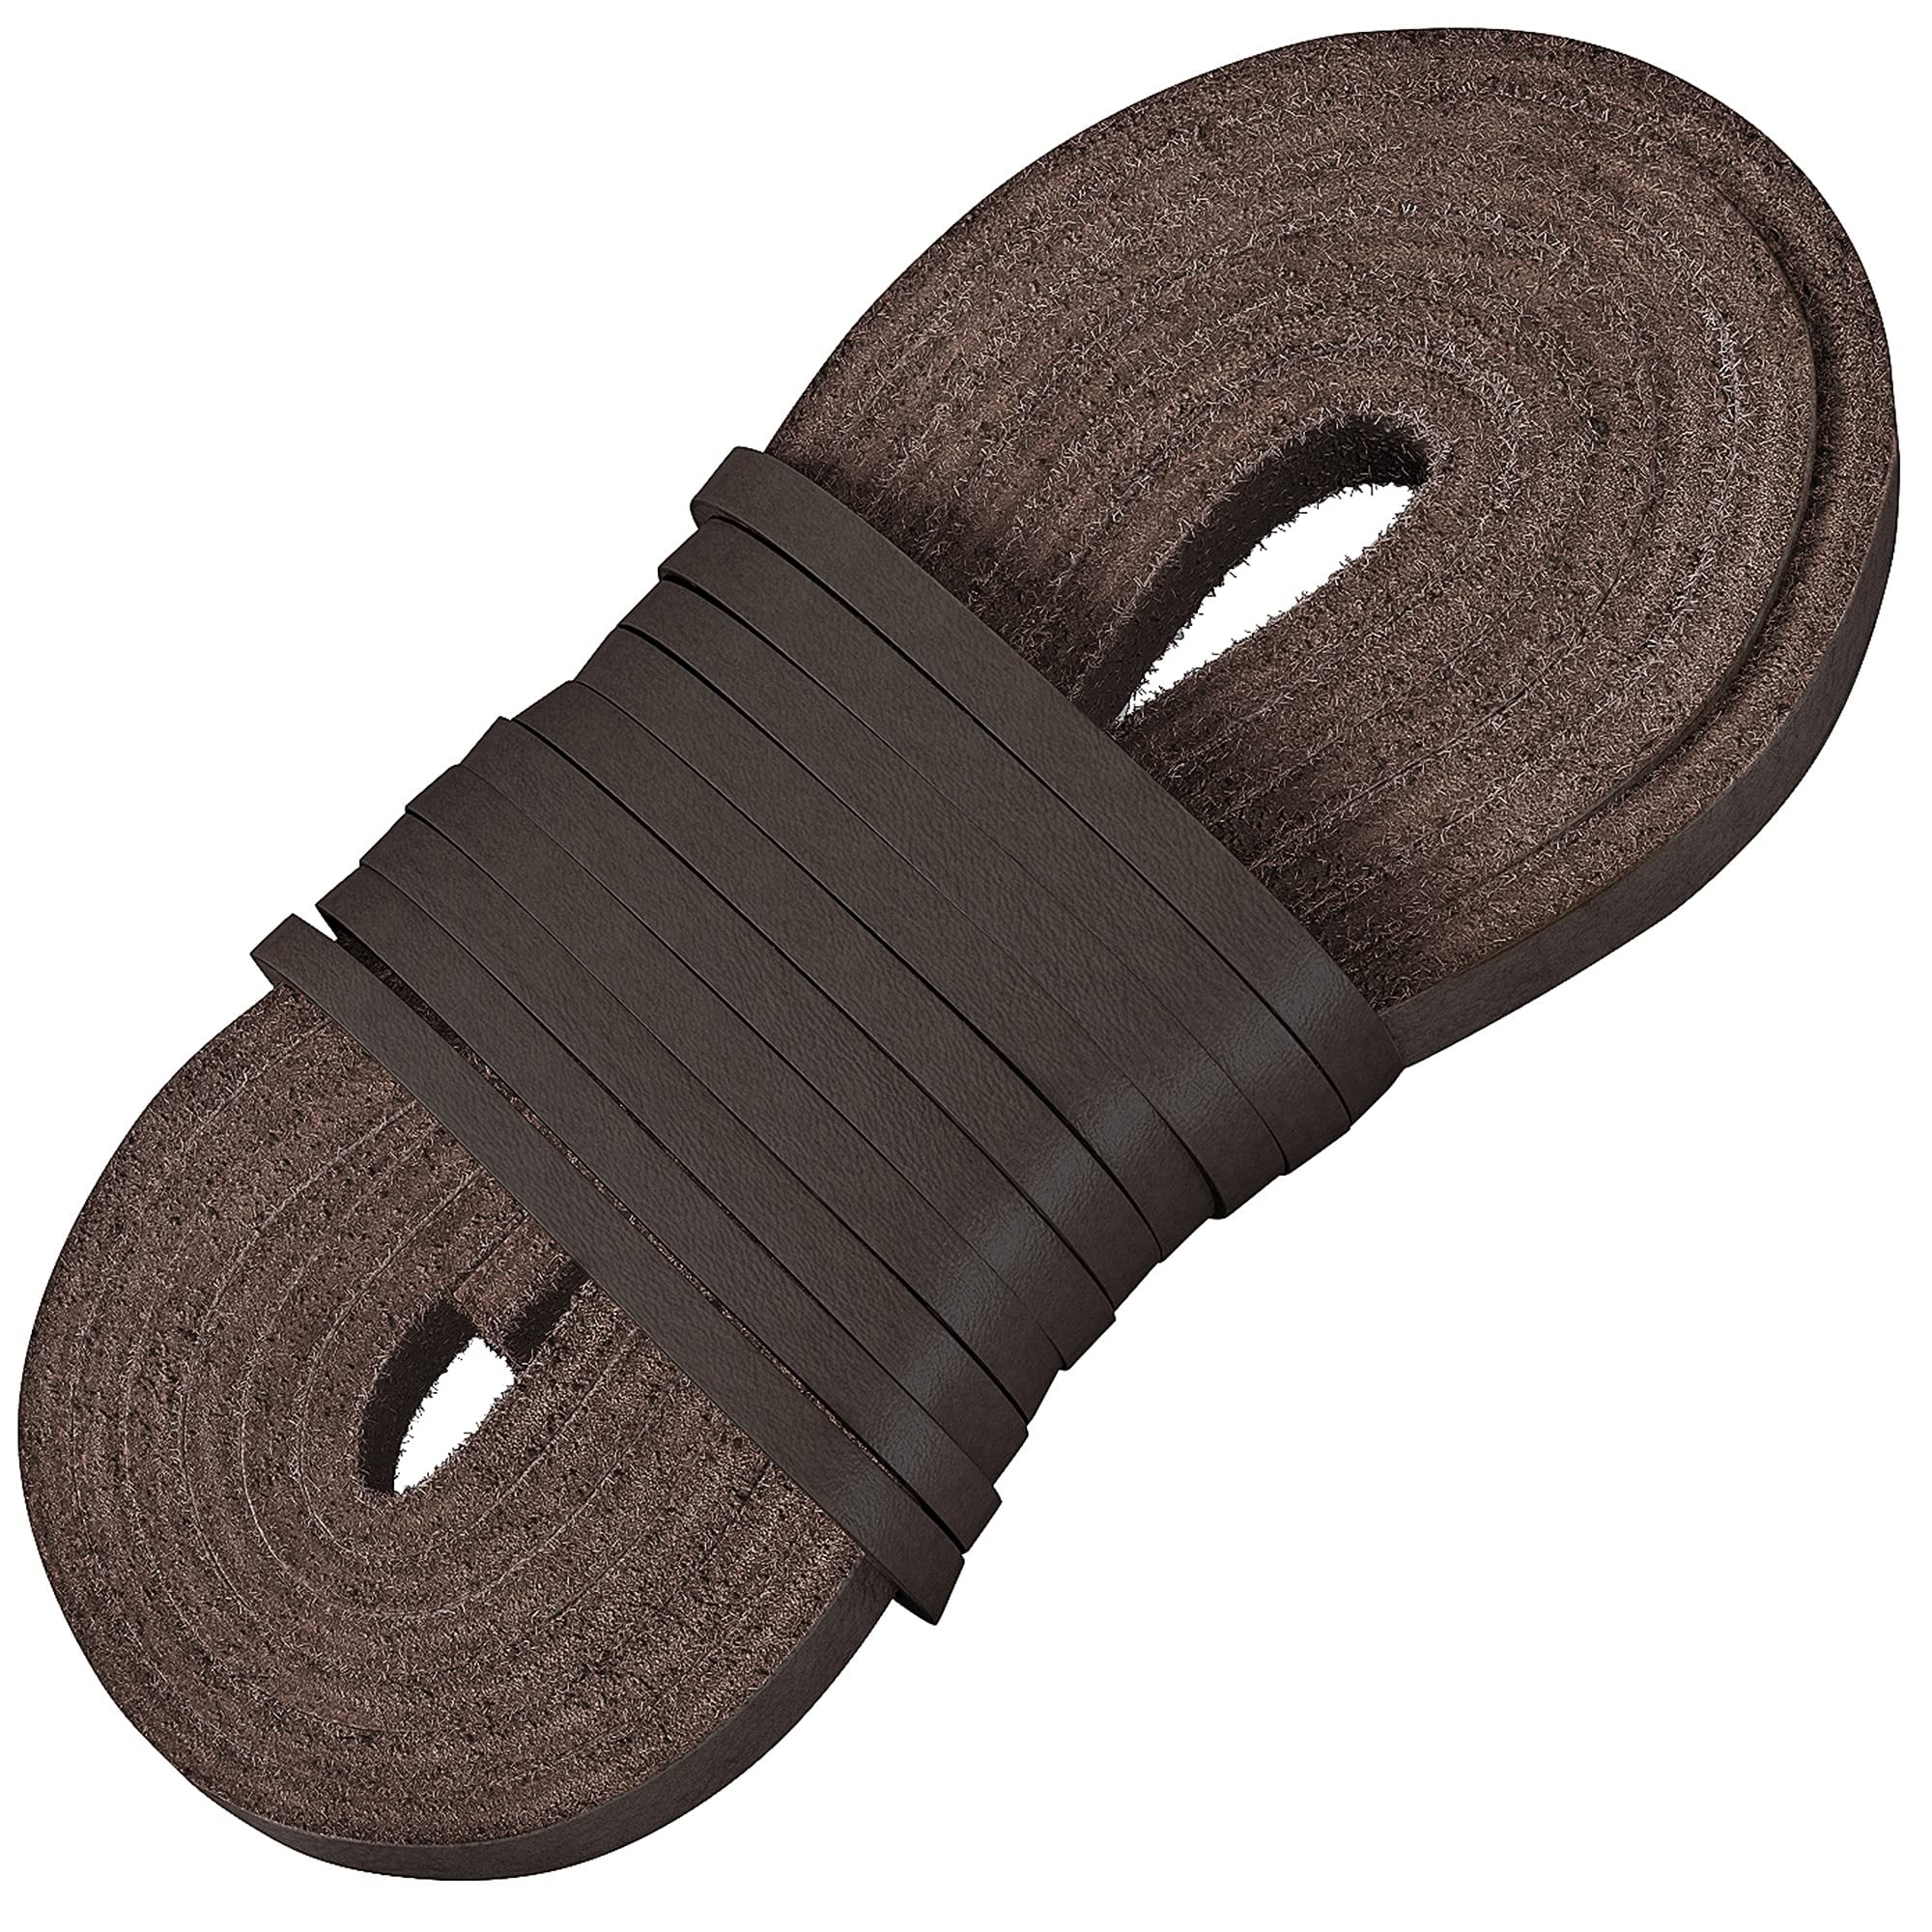 TOFL Leather Boot Laces Heavy Duty Shoelaces for Work Boots Hiking and  Walking Shoes Dark Brown 